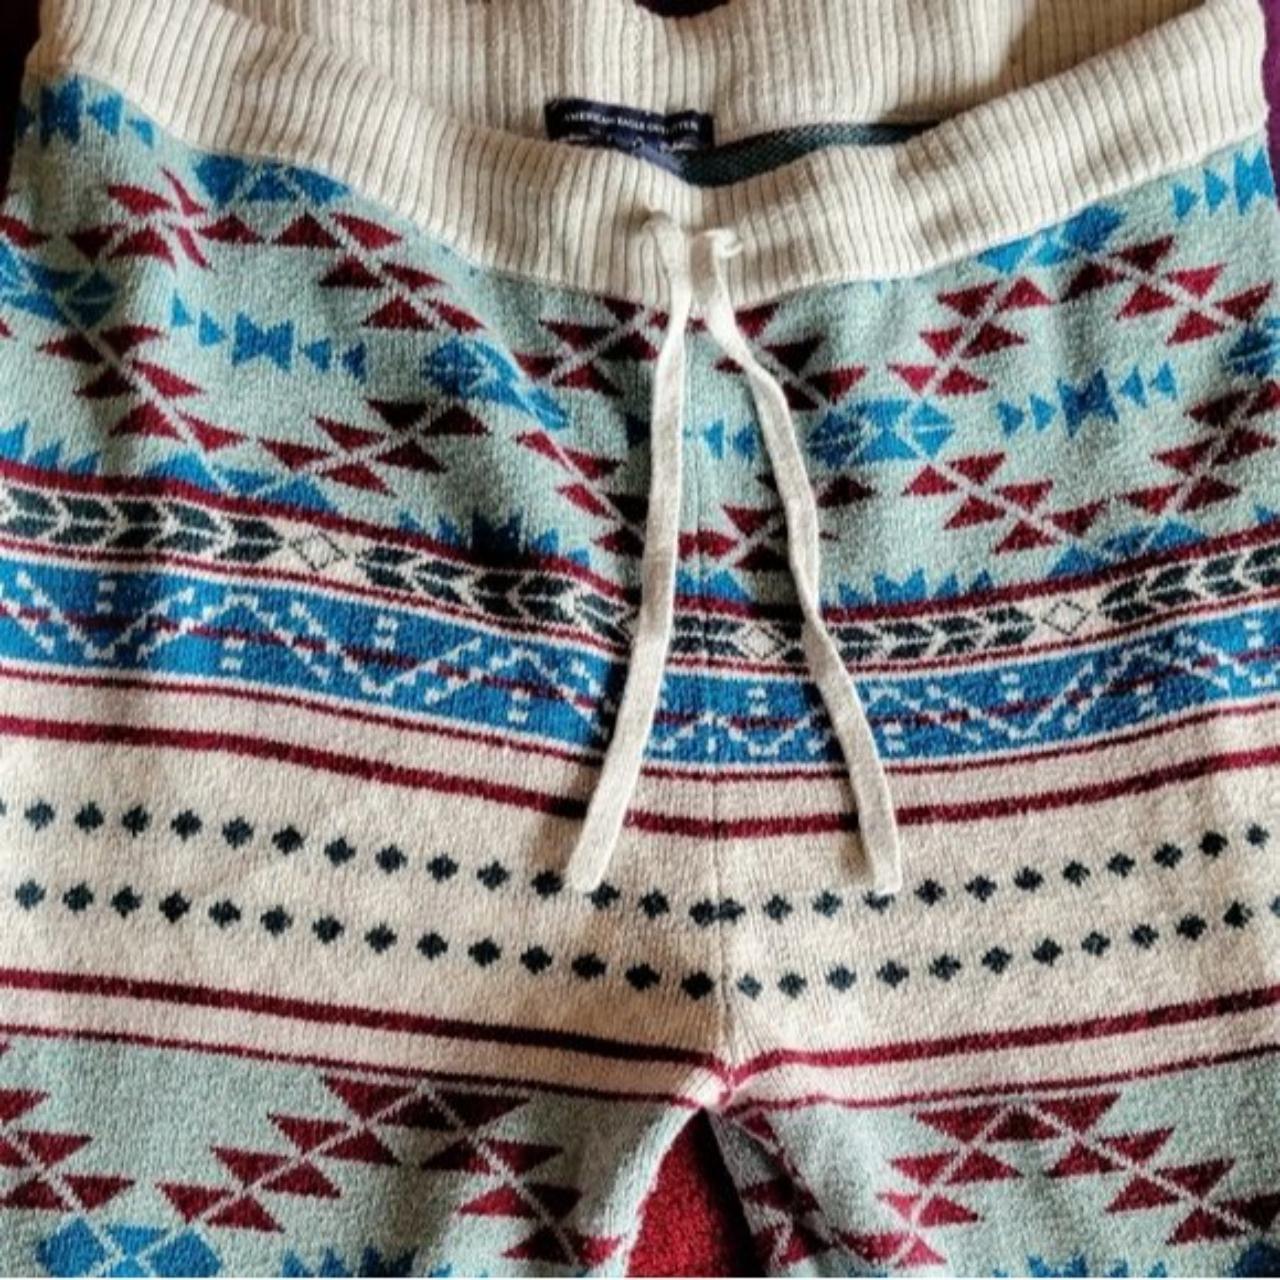 American eagle outfitters sweater leggings, knit